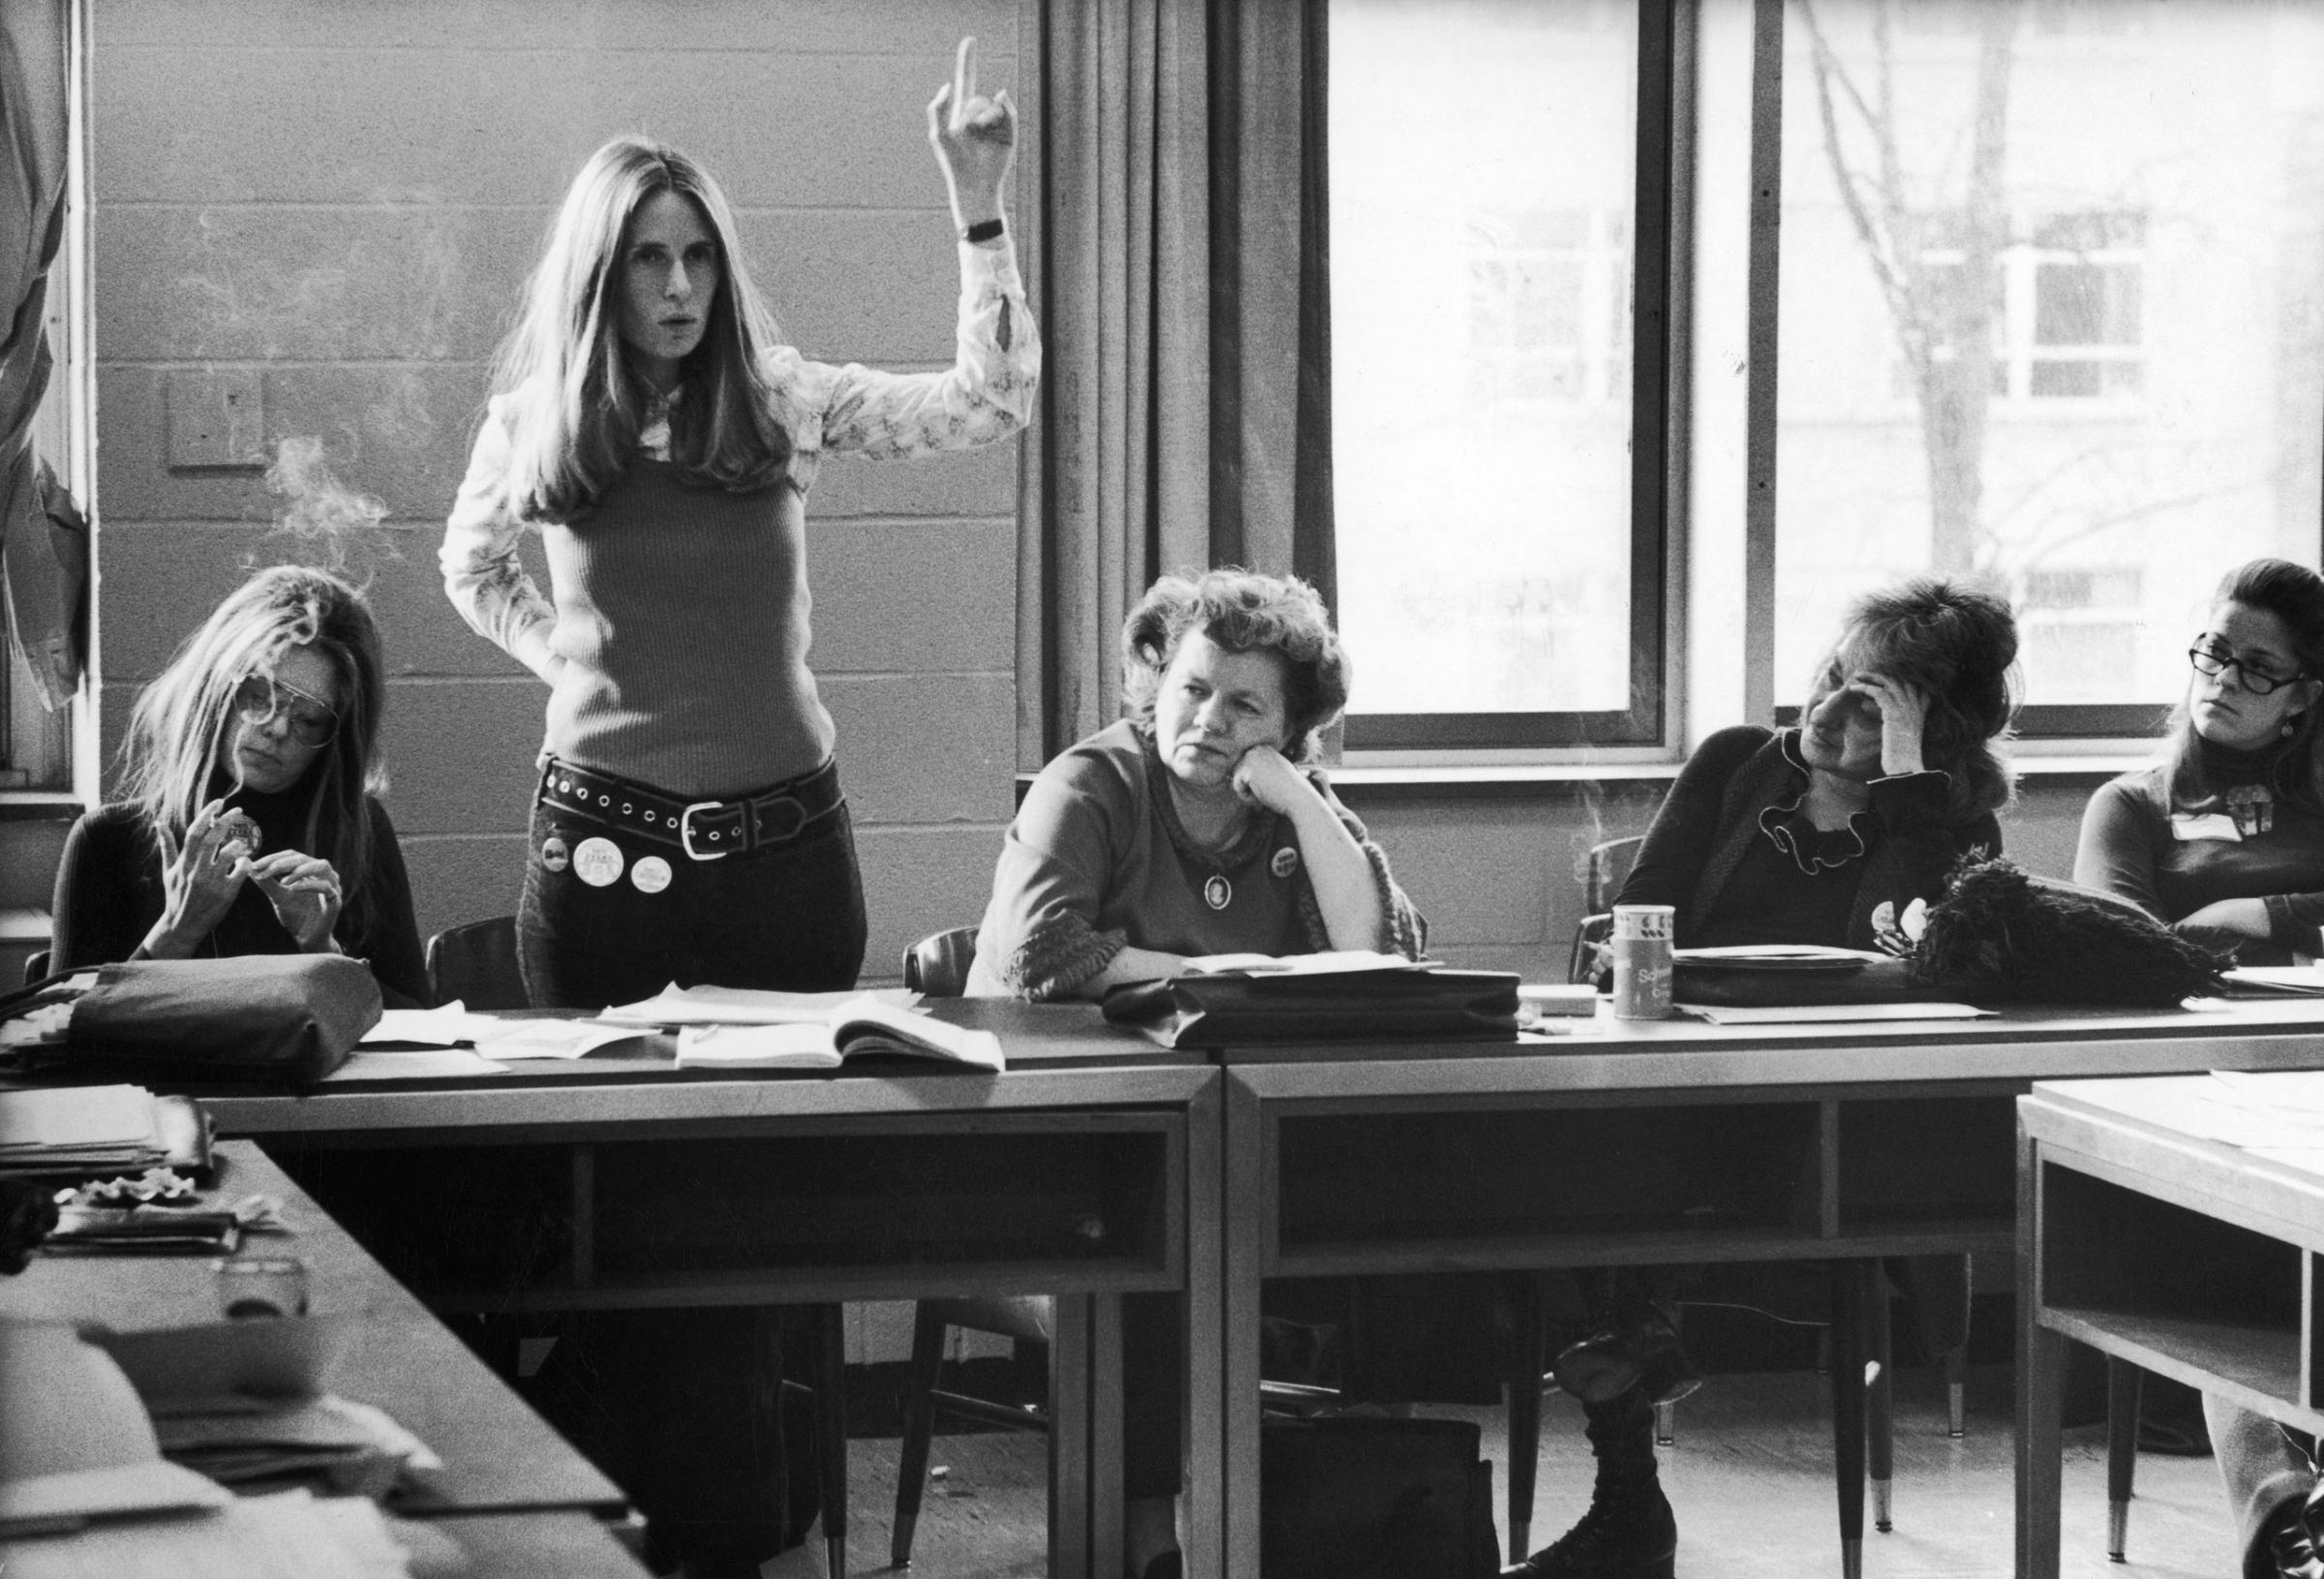 New York lawyer Brenda Feigen Fasteau, arm raised, argues about candidate support at a Washington meeting of the Caucus's National Policy Council. Some fellow members, left to right are: Ms. editor Gloria Steinem, National Organization for Women (NOW) president Wilma Scott Heide and author Betty Friedan.